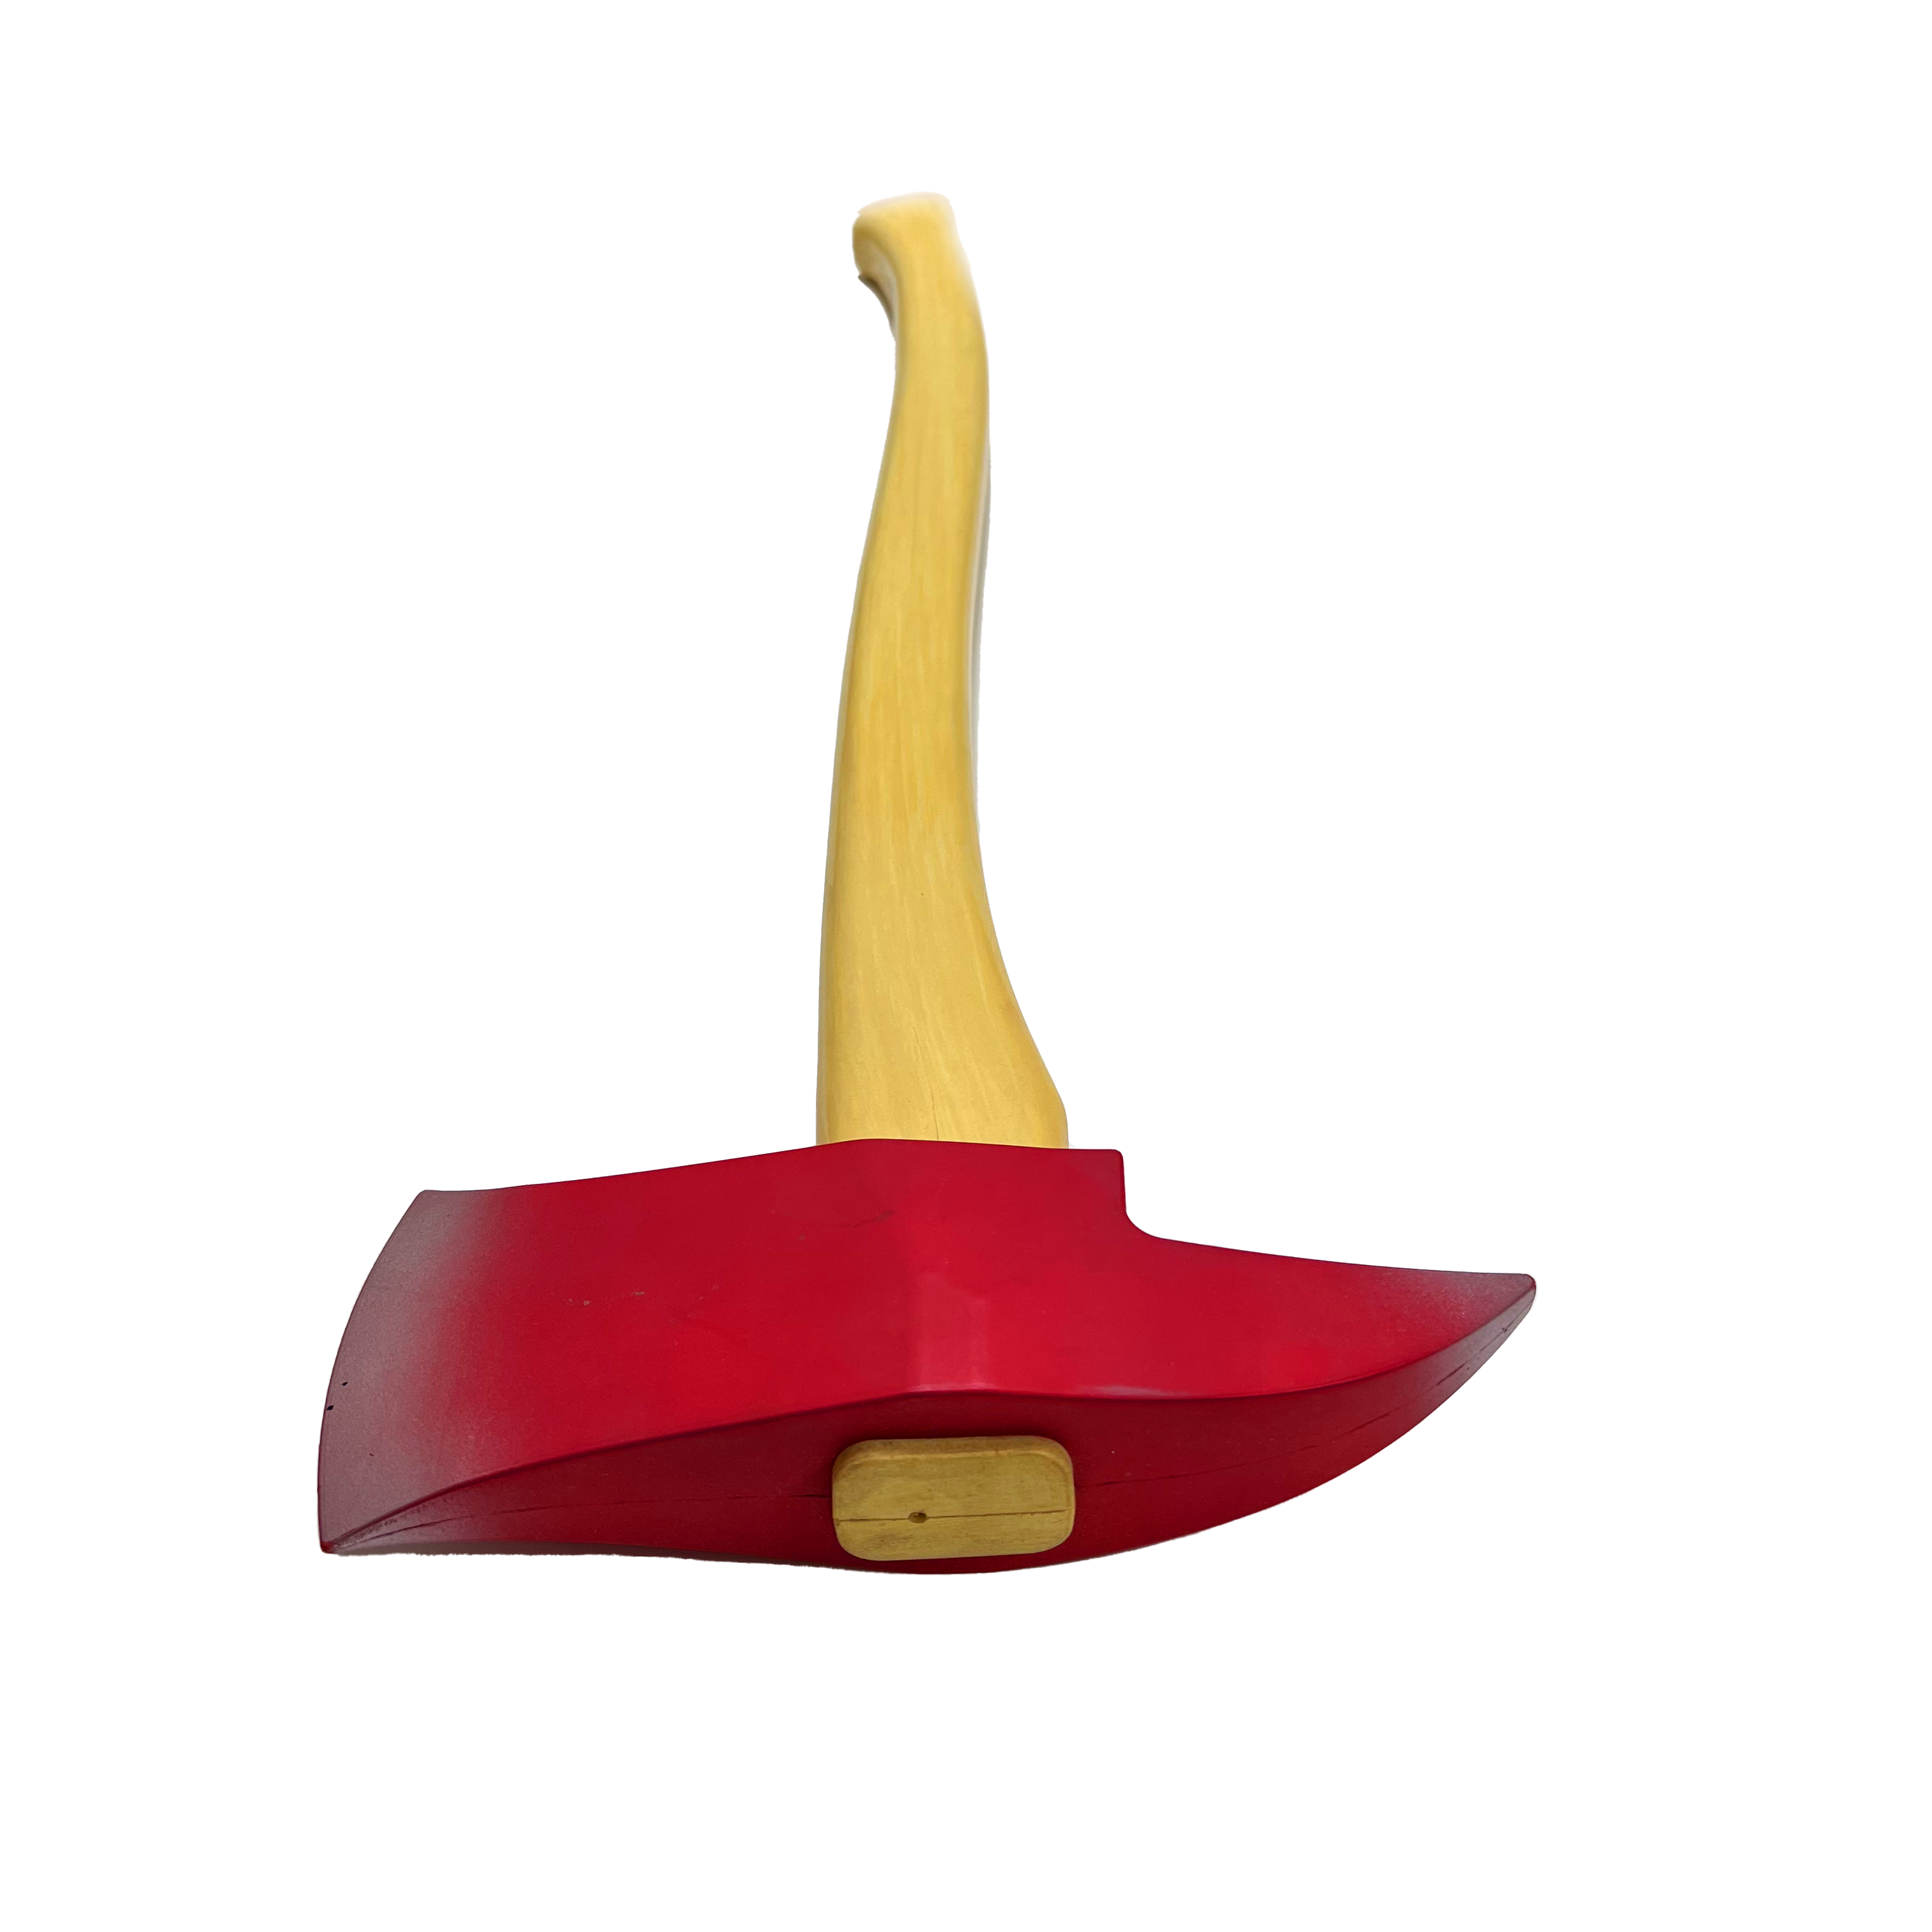 27 Inch Classic Fireman's Axe - Bright Red and Yellow